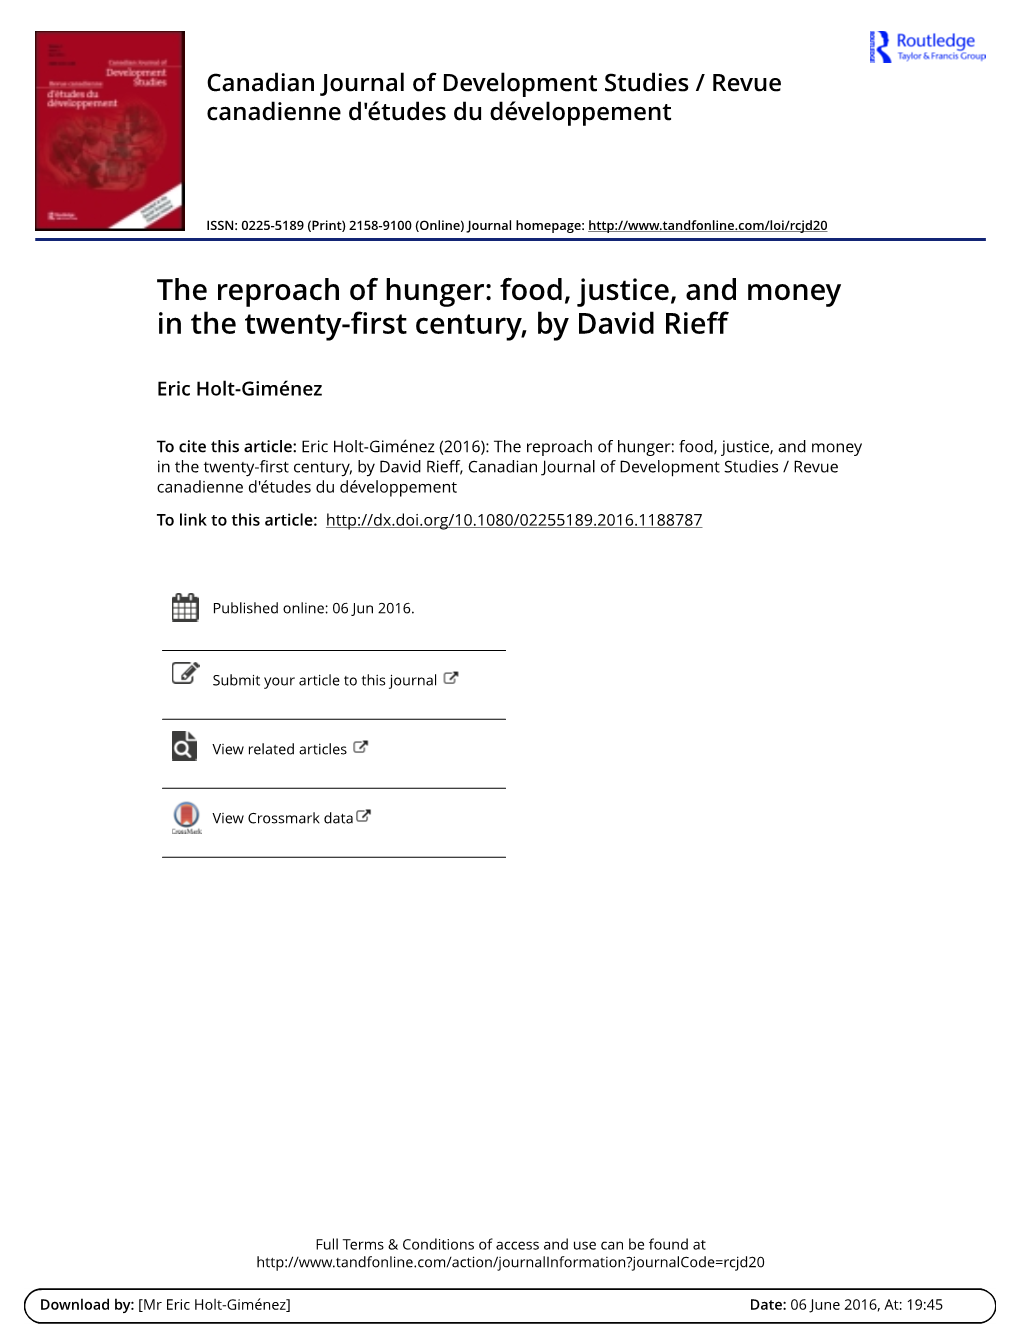 The Reproach of Hunger: Food, Justice, and Money in the Twenty-First Century, by David Rieff